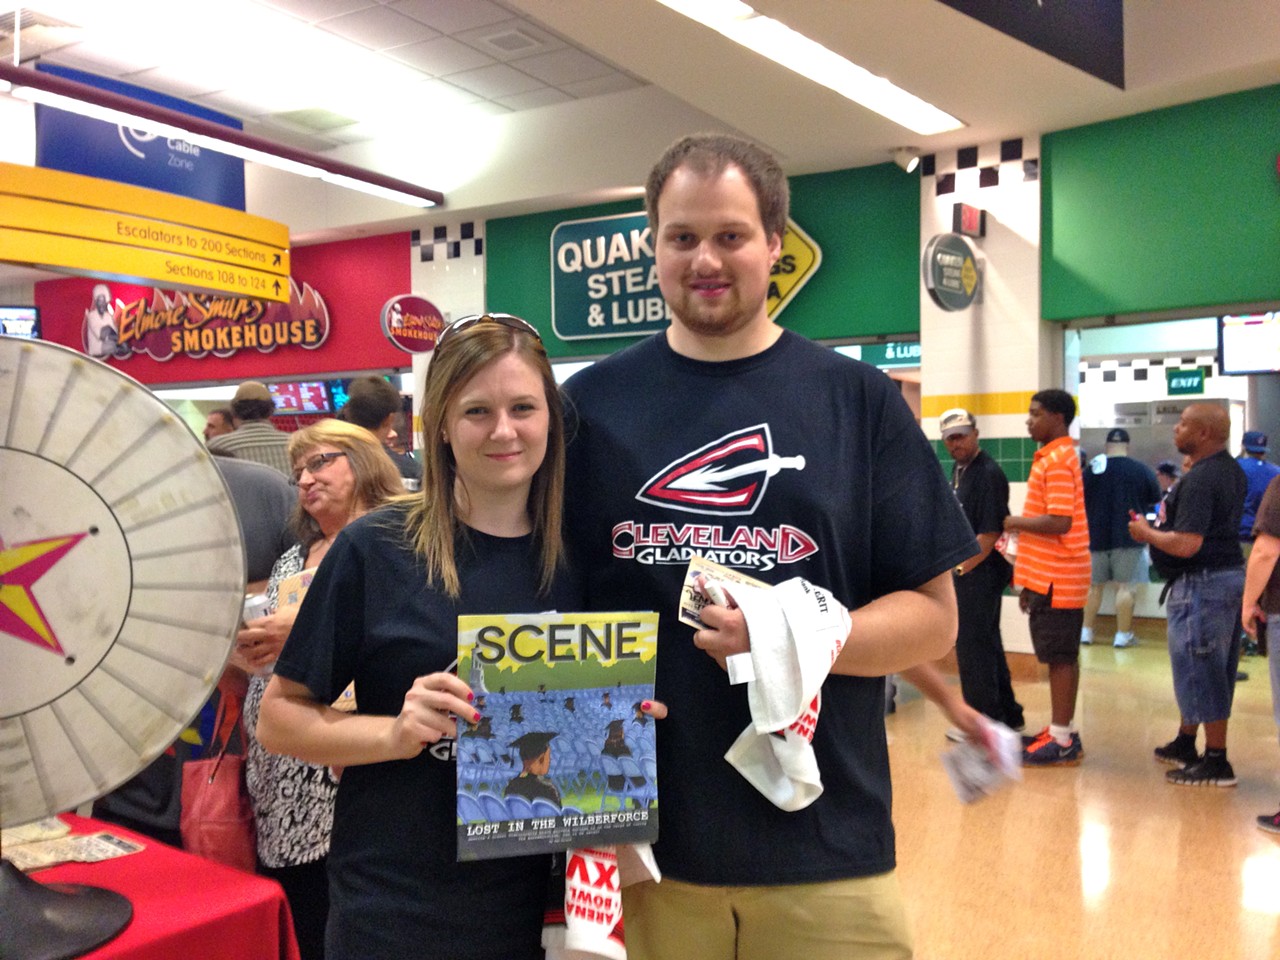 10 Photos of the Scene Events Team Driven by Fiat of Strongsville at The Cleveland Gladiators ArenaBowl Championship